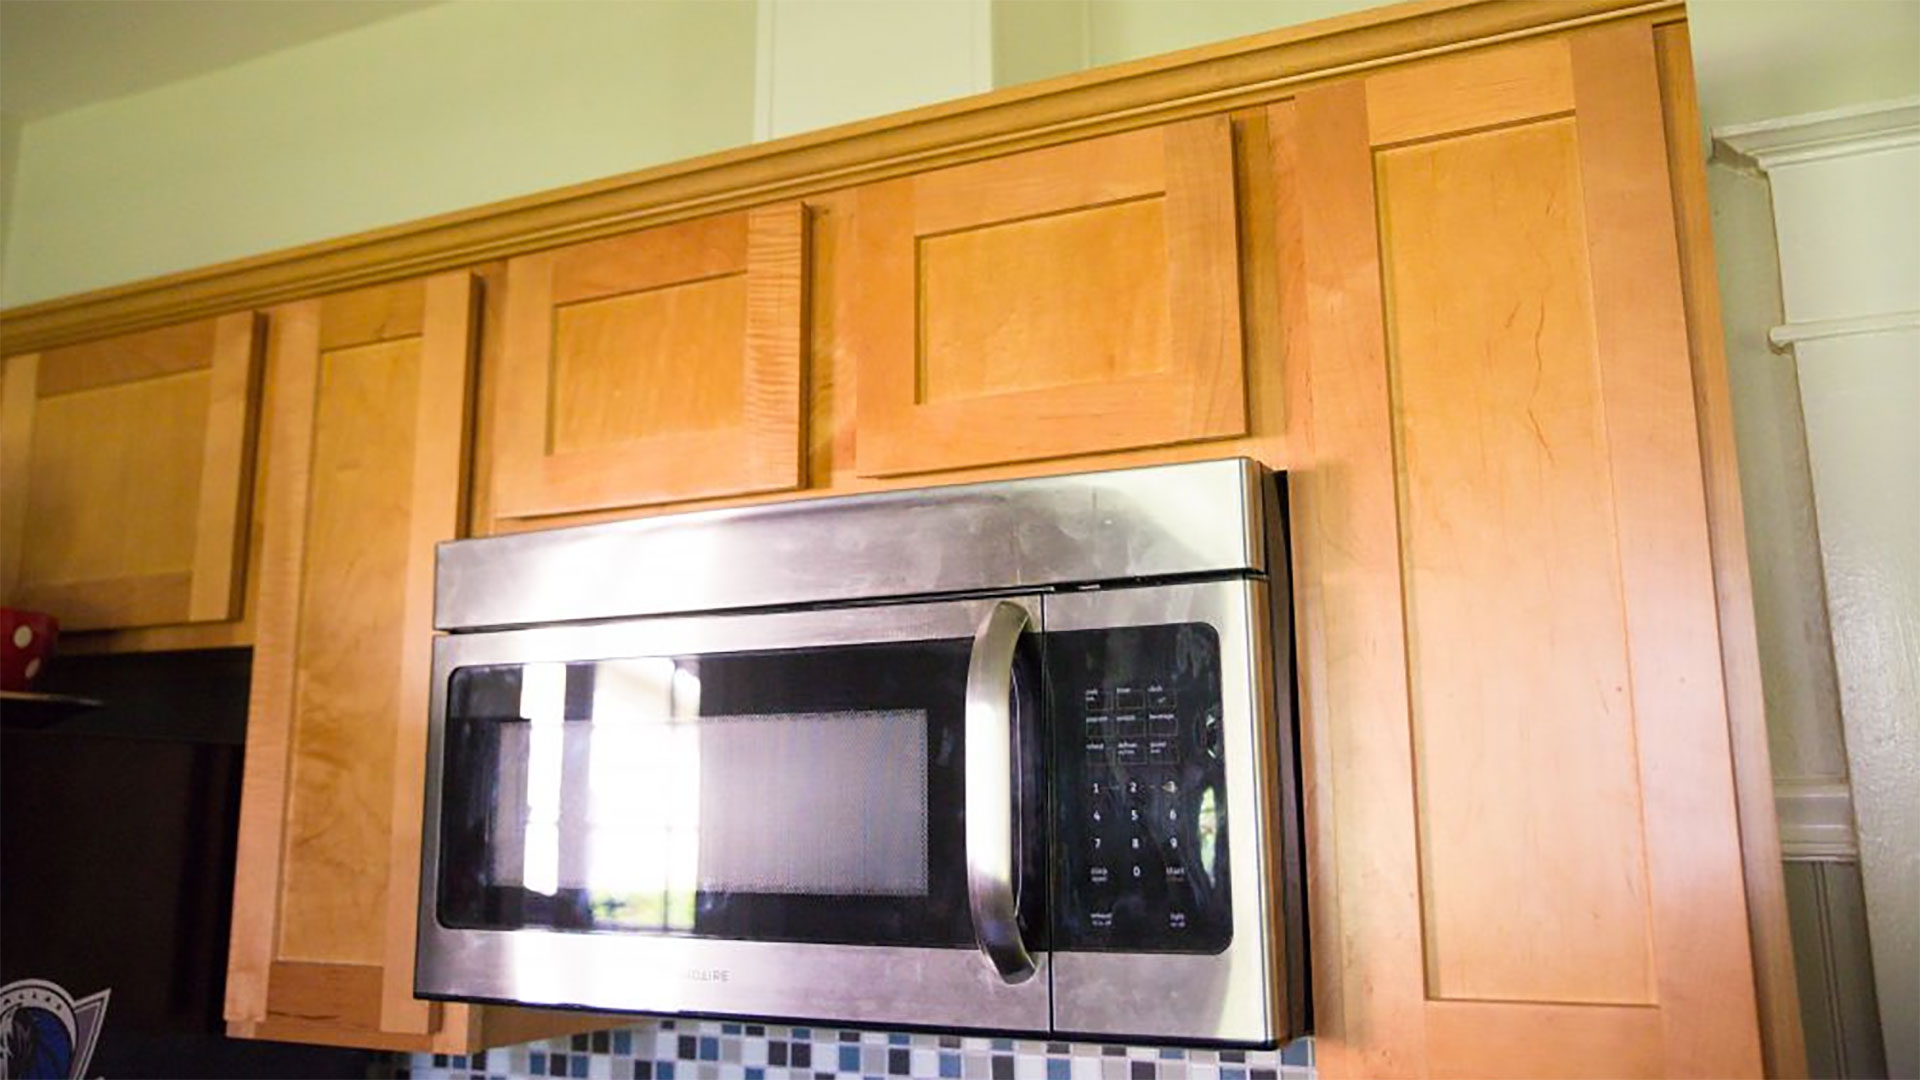 How to Install a Microwave with External Venting